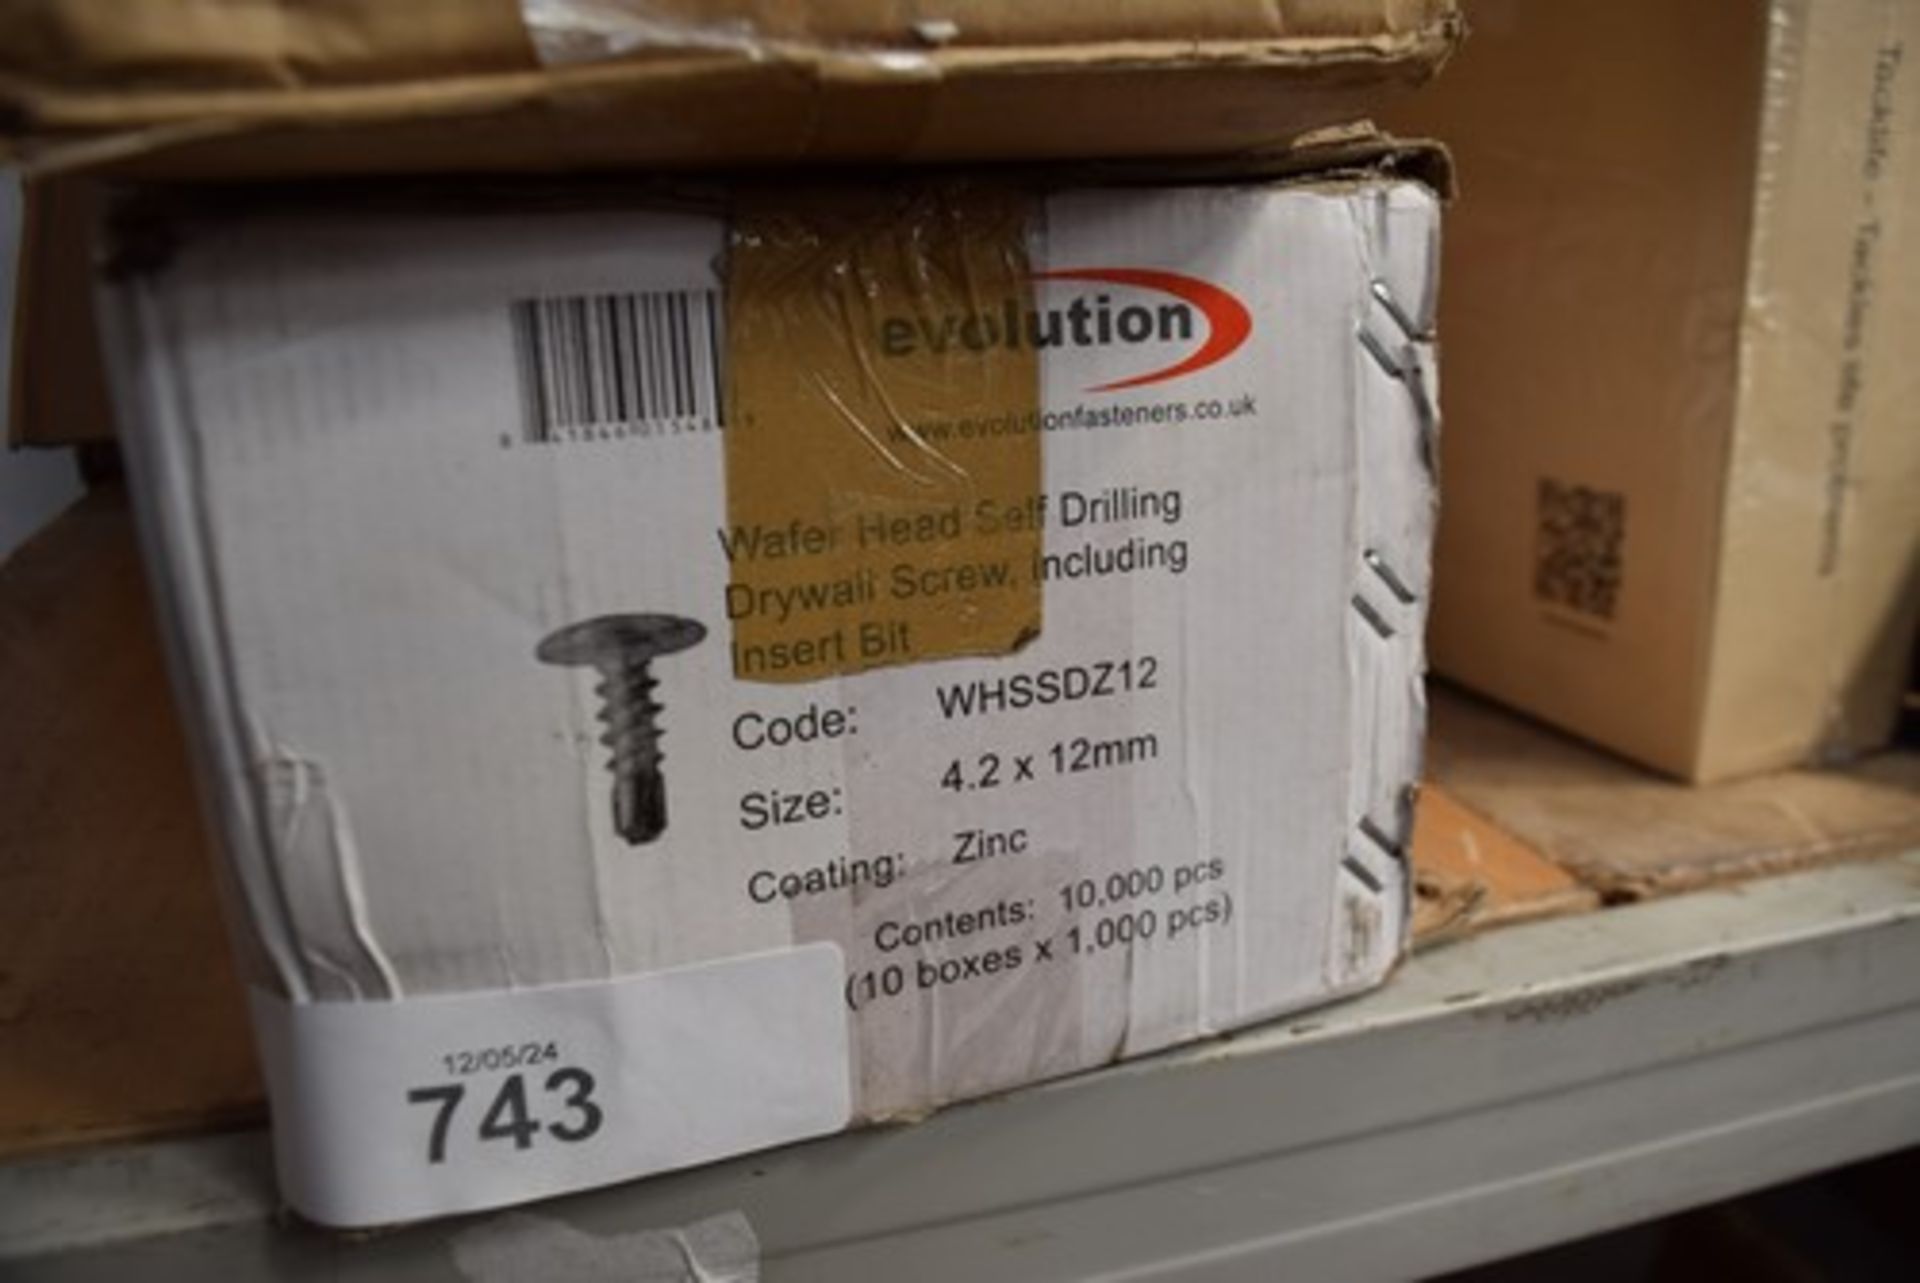 1 x box of Evolution wafer head self drilling drew wall screws, size 4.2 x 12mm, approximately 10, - Image 2 of 4